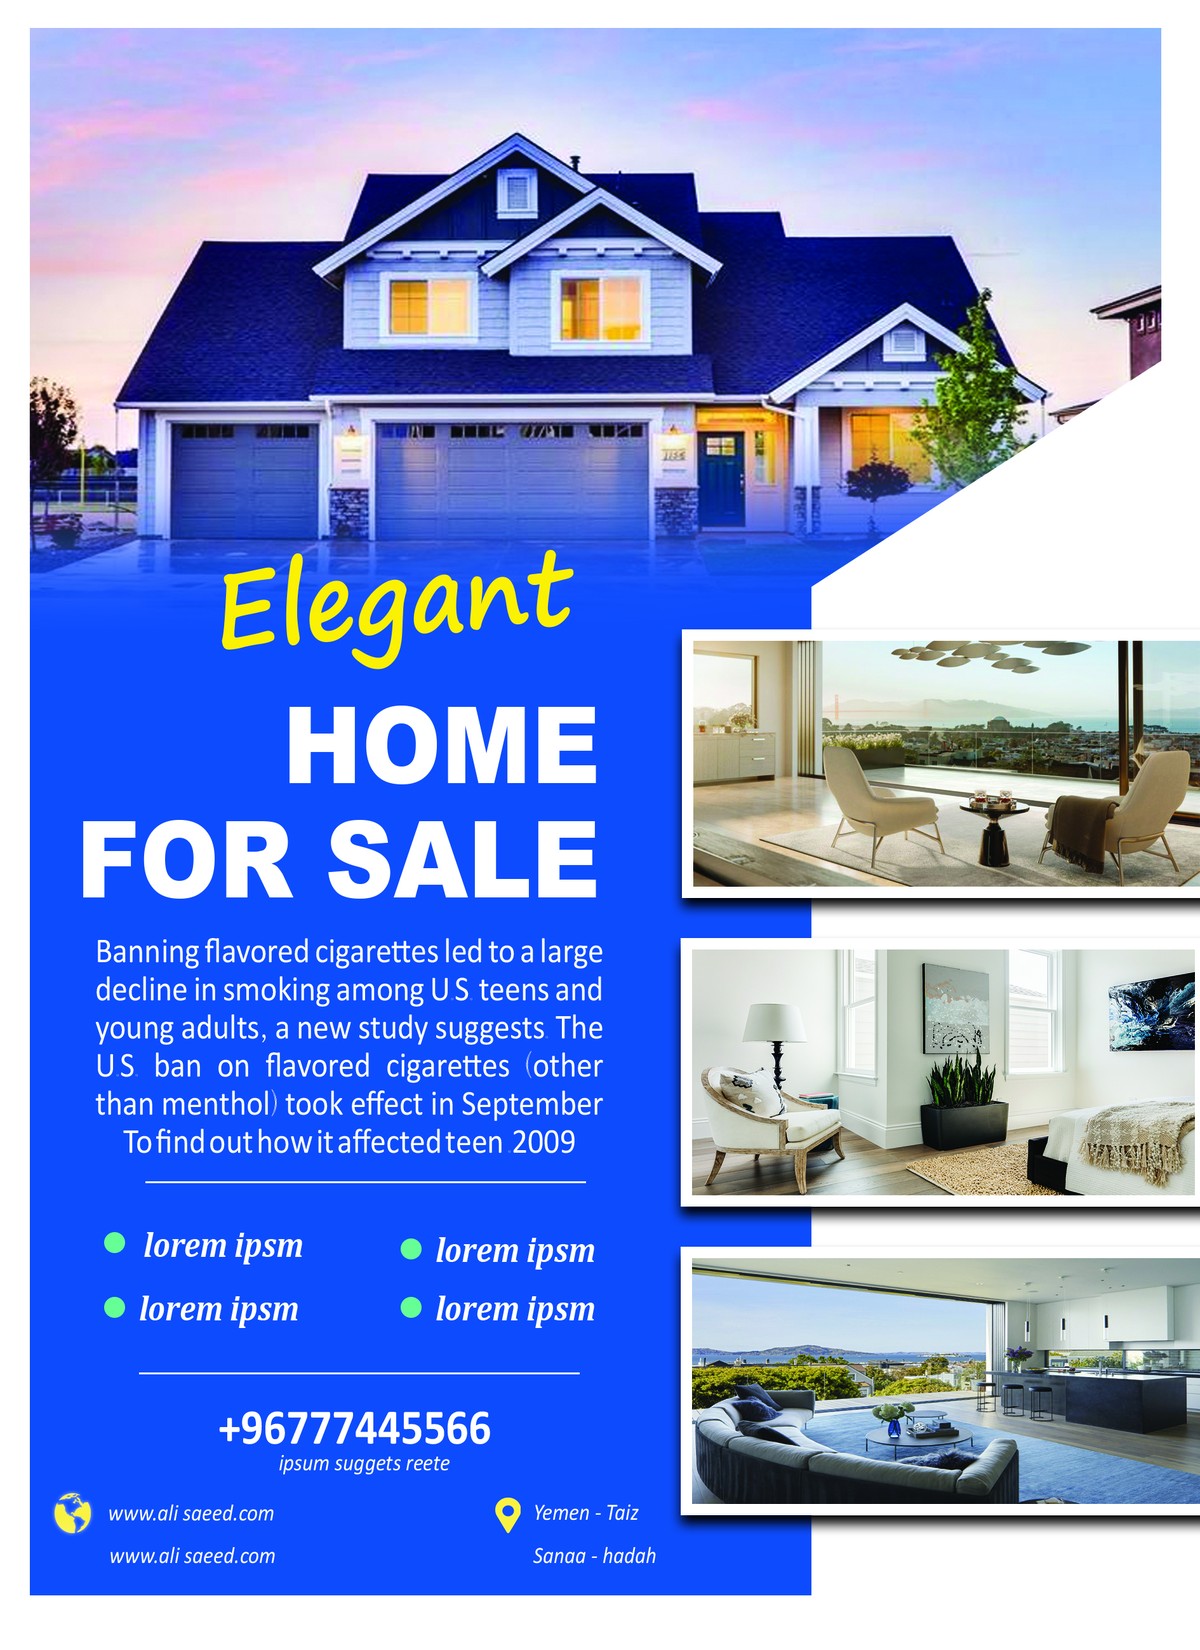 HOME_FOR_SALE